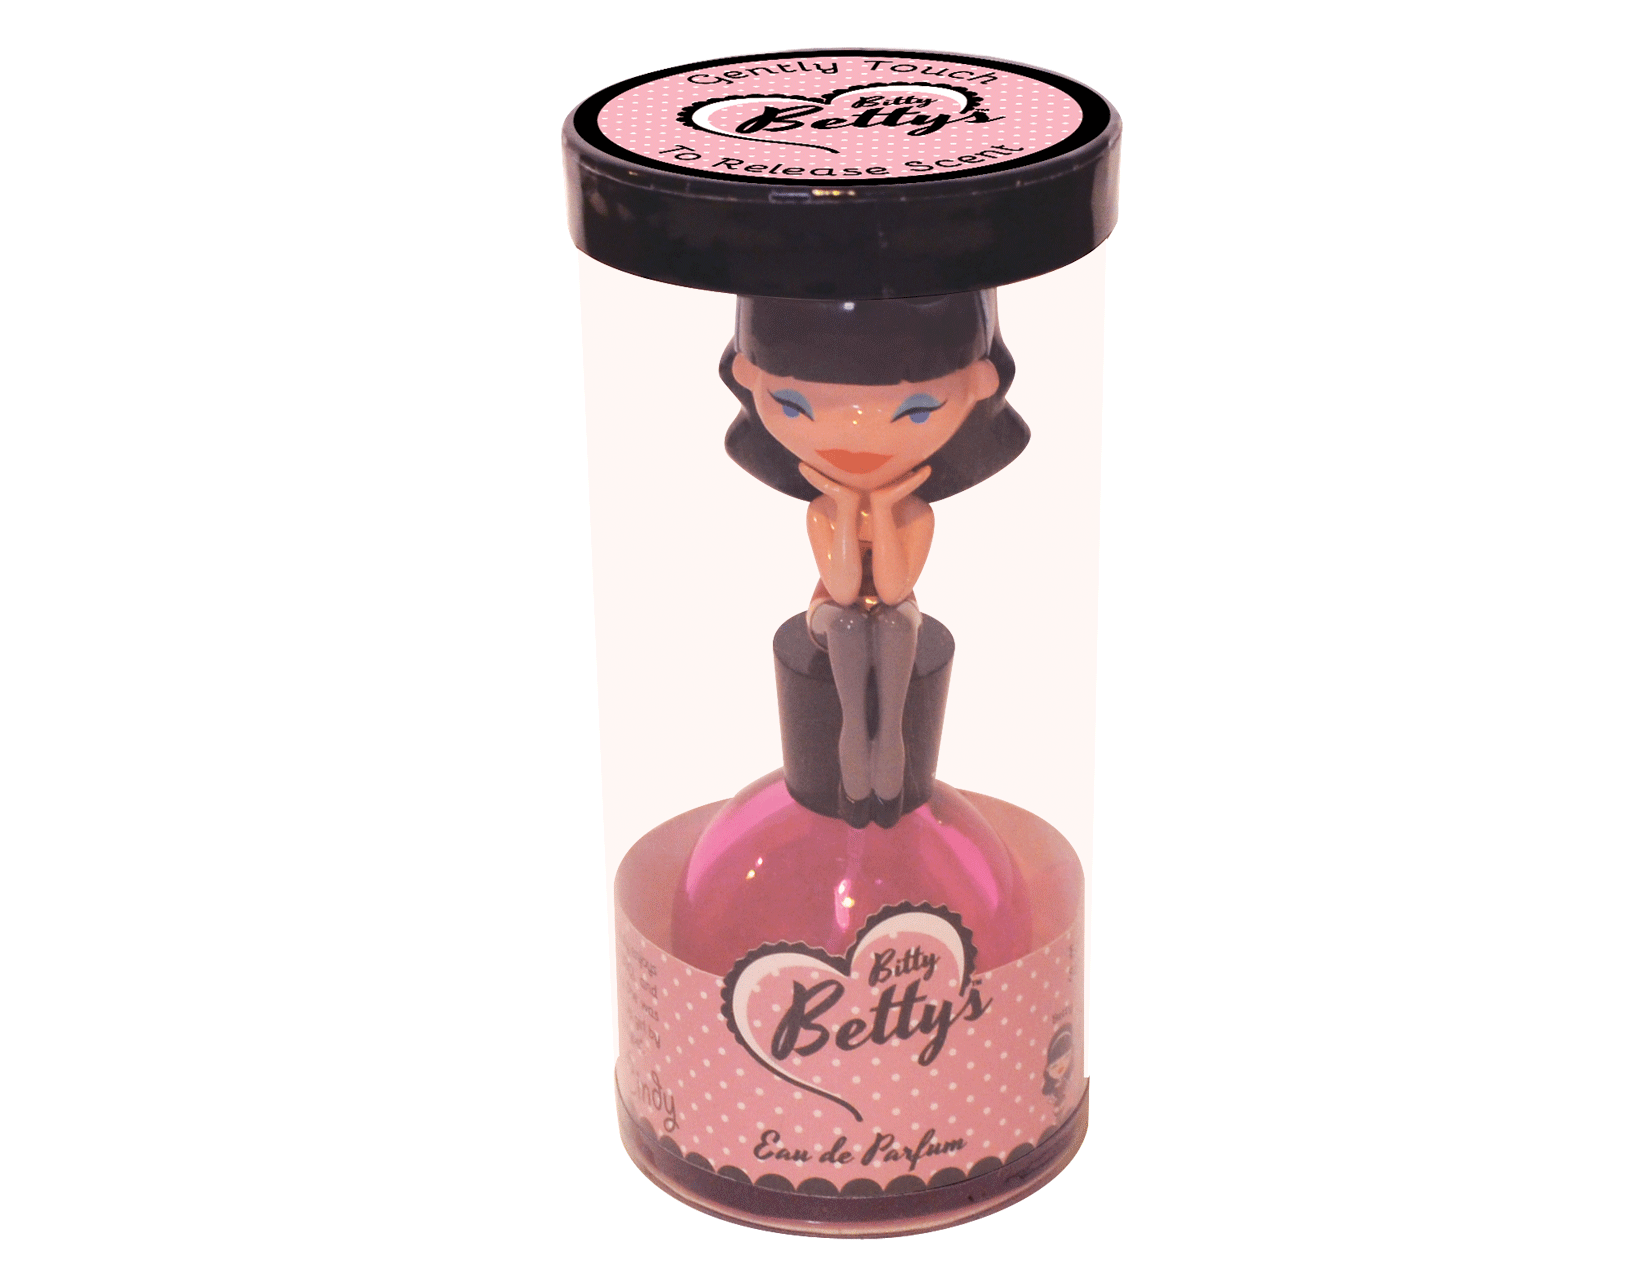 Bitty Bettys Fragrance Package